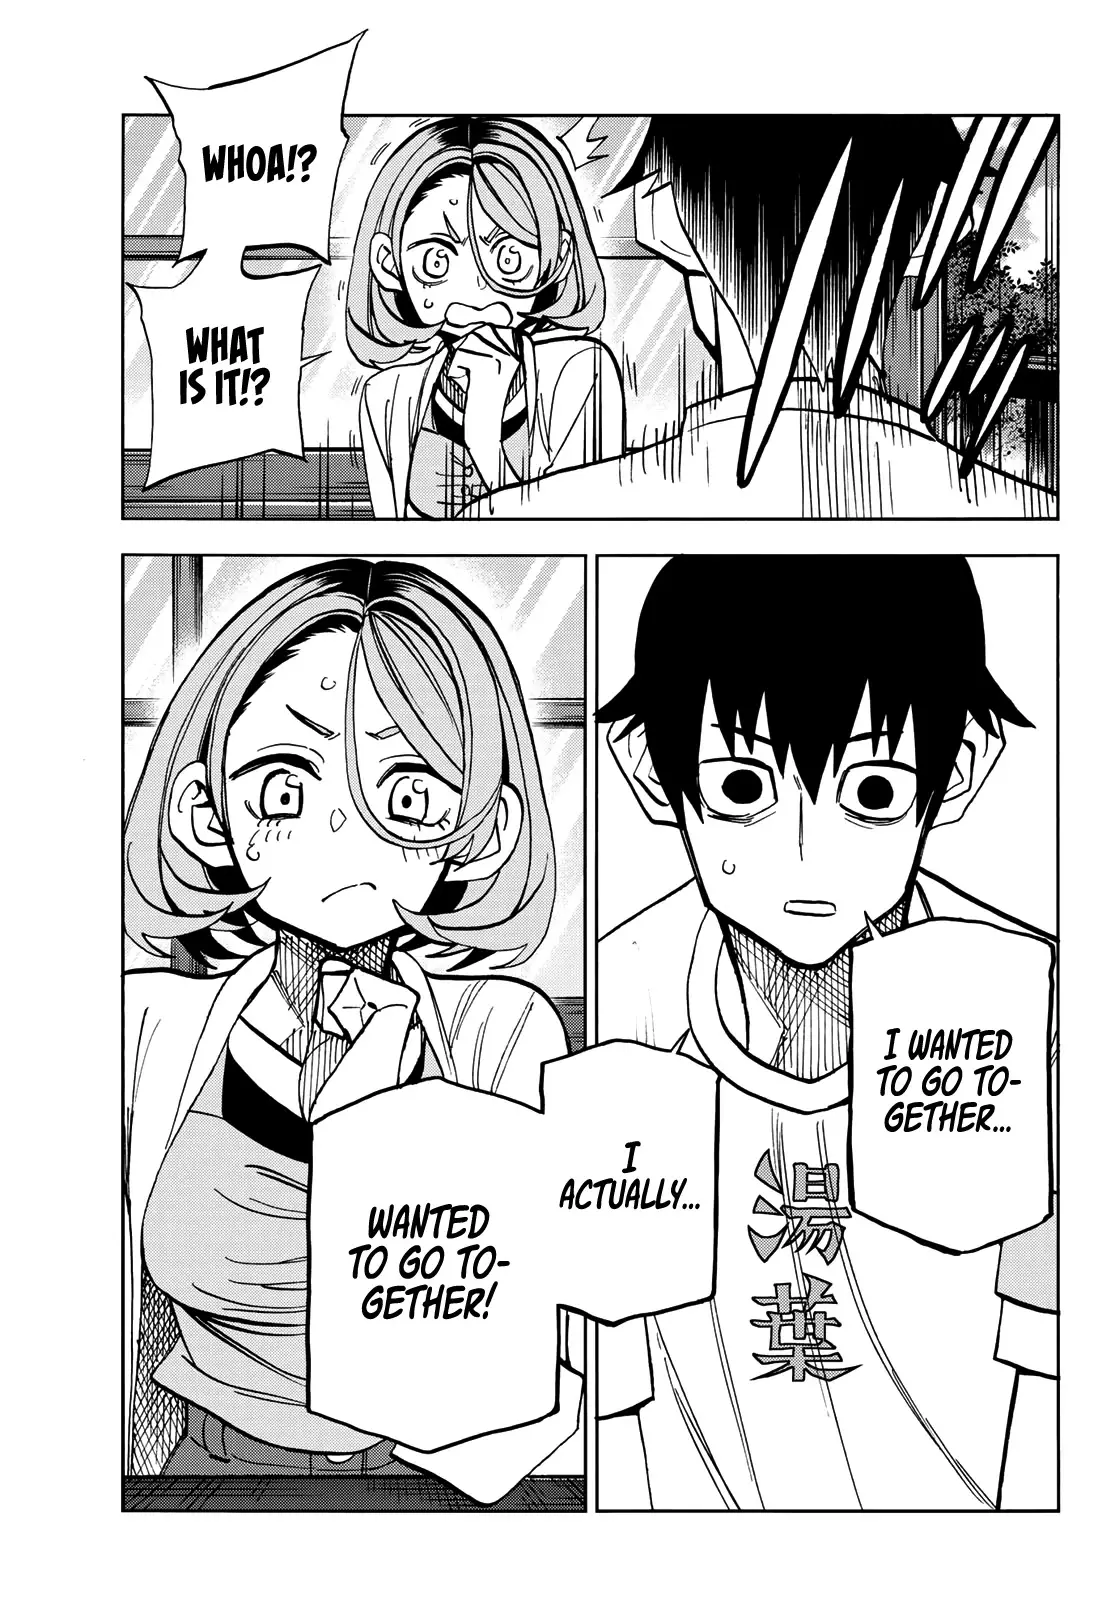 The Story Between A Dumb Prefect And A High School Girl With An Inappropriate Skirt Length - 23 page 36